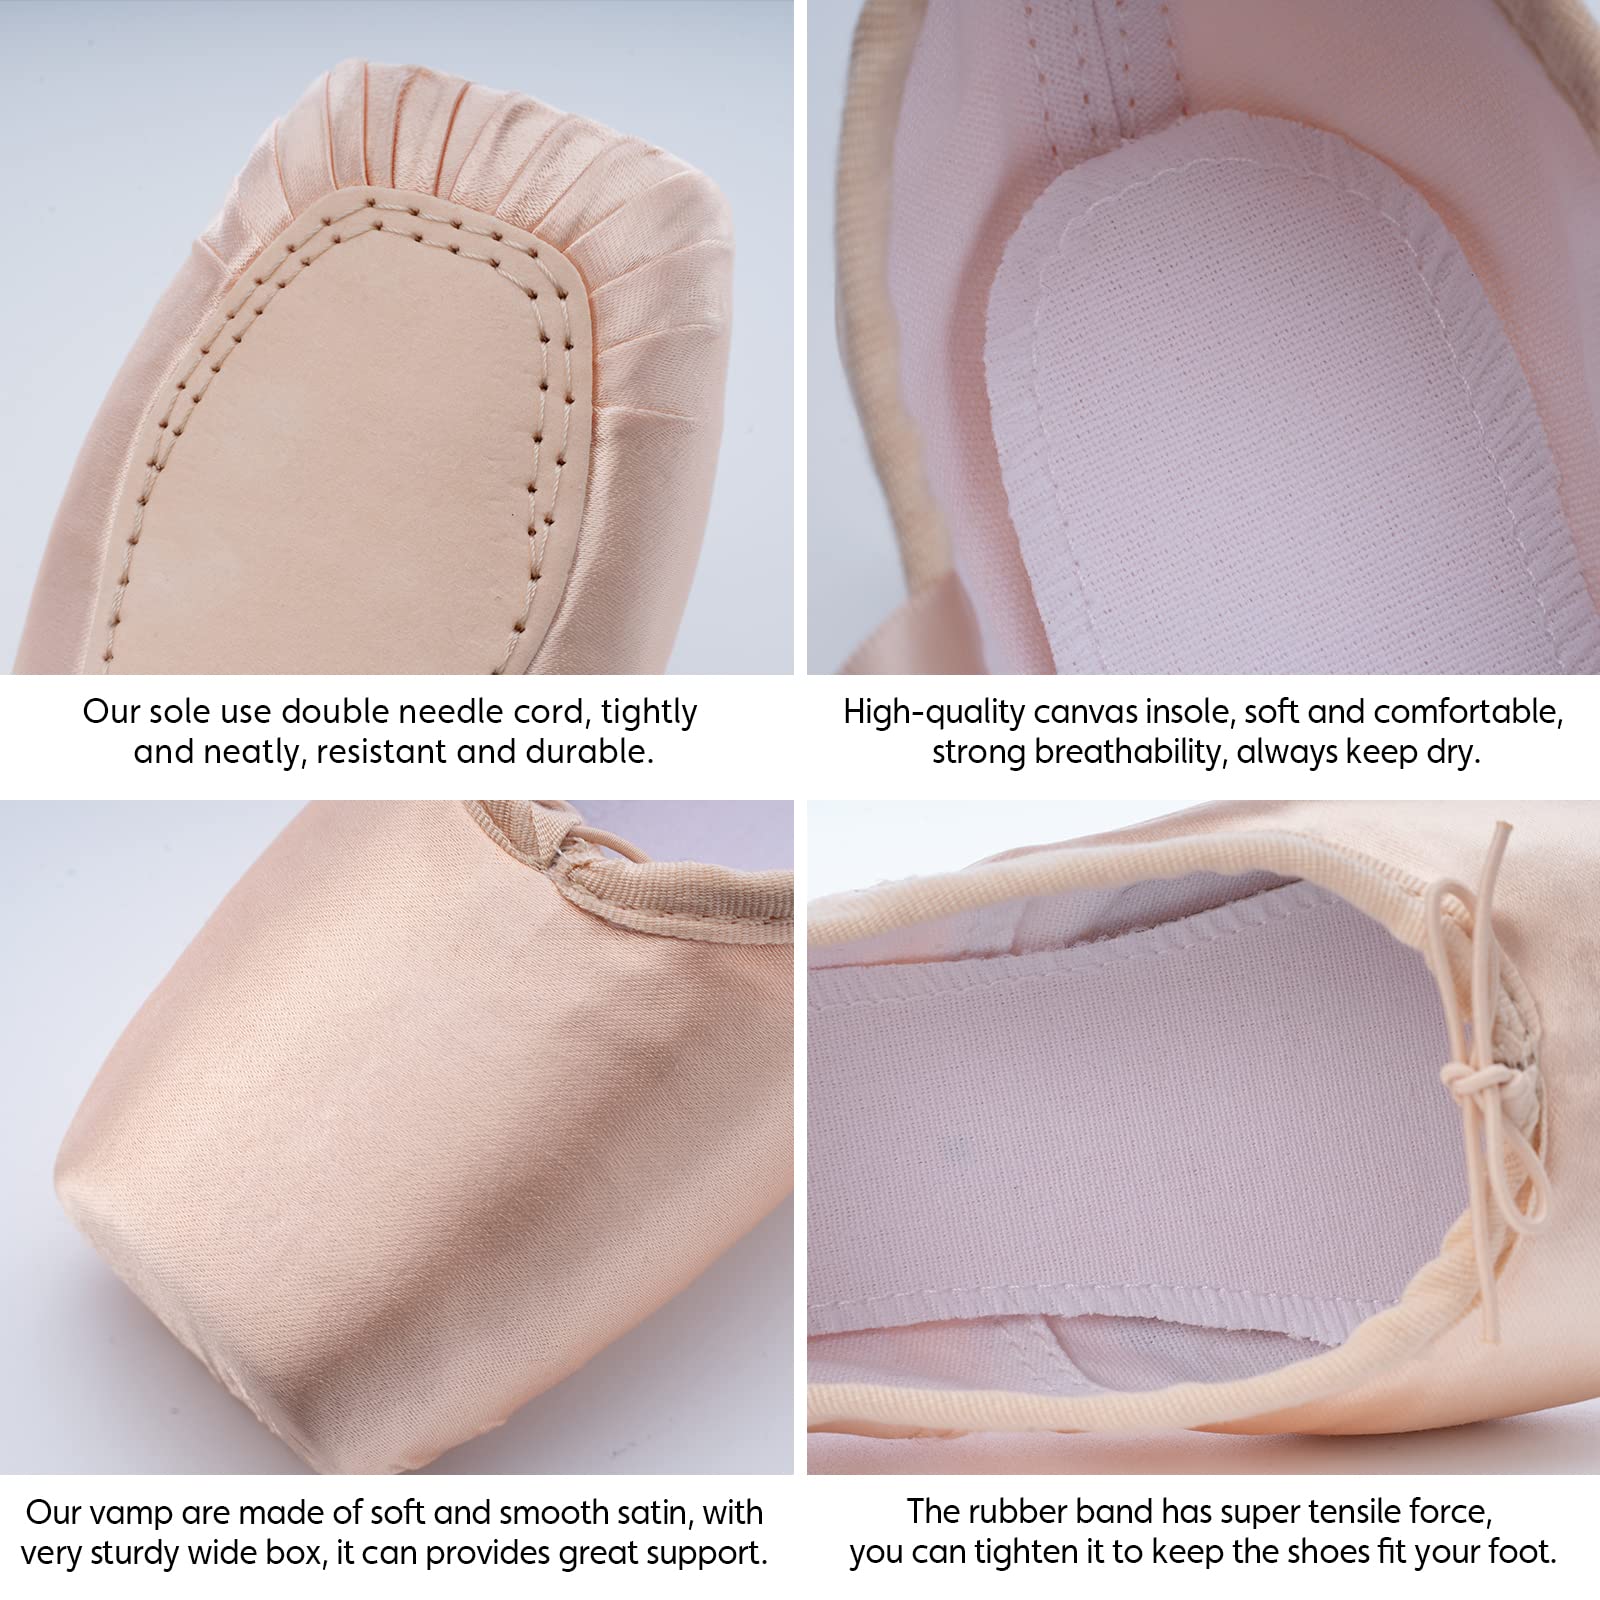 DoGeek Satin Pointe Shoes for Girls and Ladies Professional Ballet Dance Shoes with Ribbon for School or Home (Choose One Size Larger)